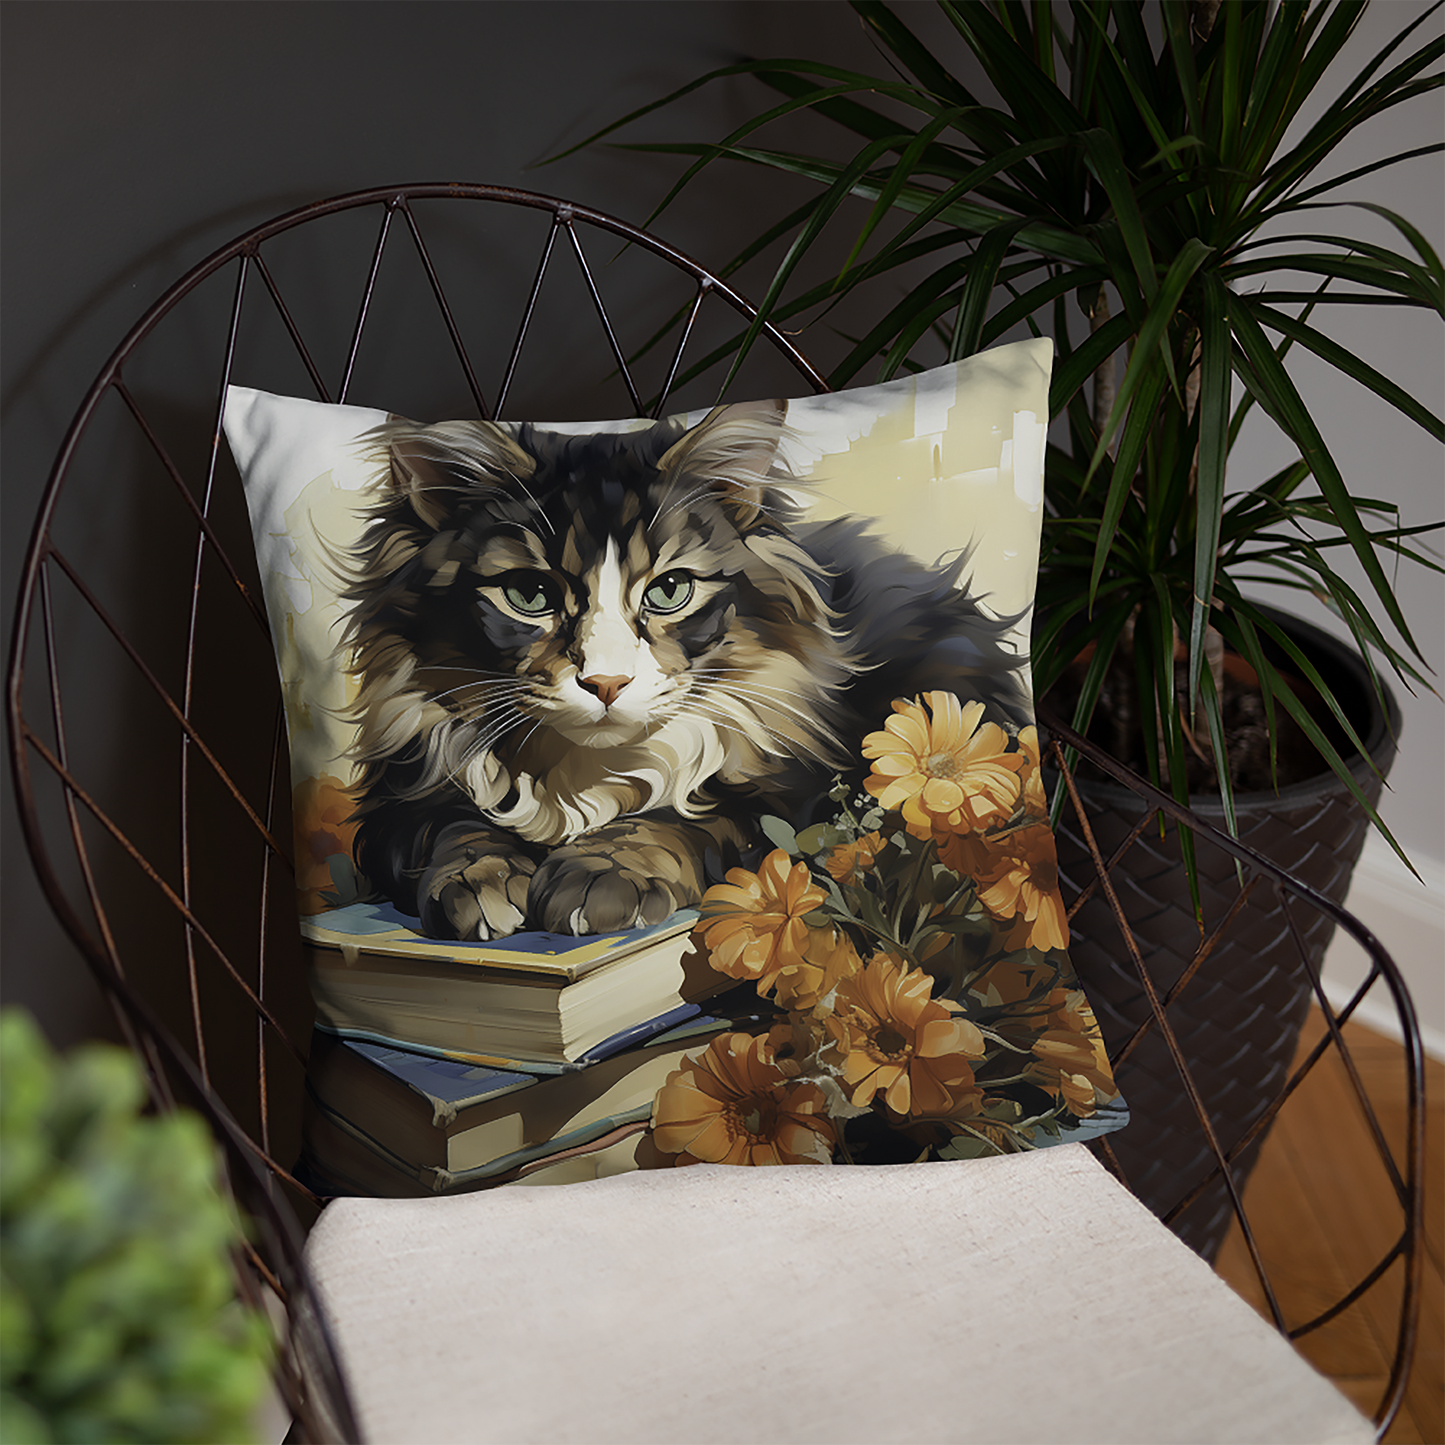 Cat Throw Pillow Floral Feline Study Graphic Illustration Polyester Decorative Cushion 18x18